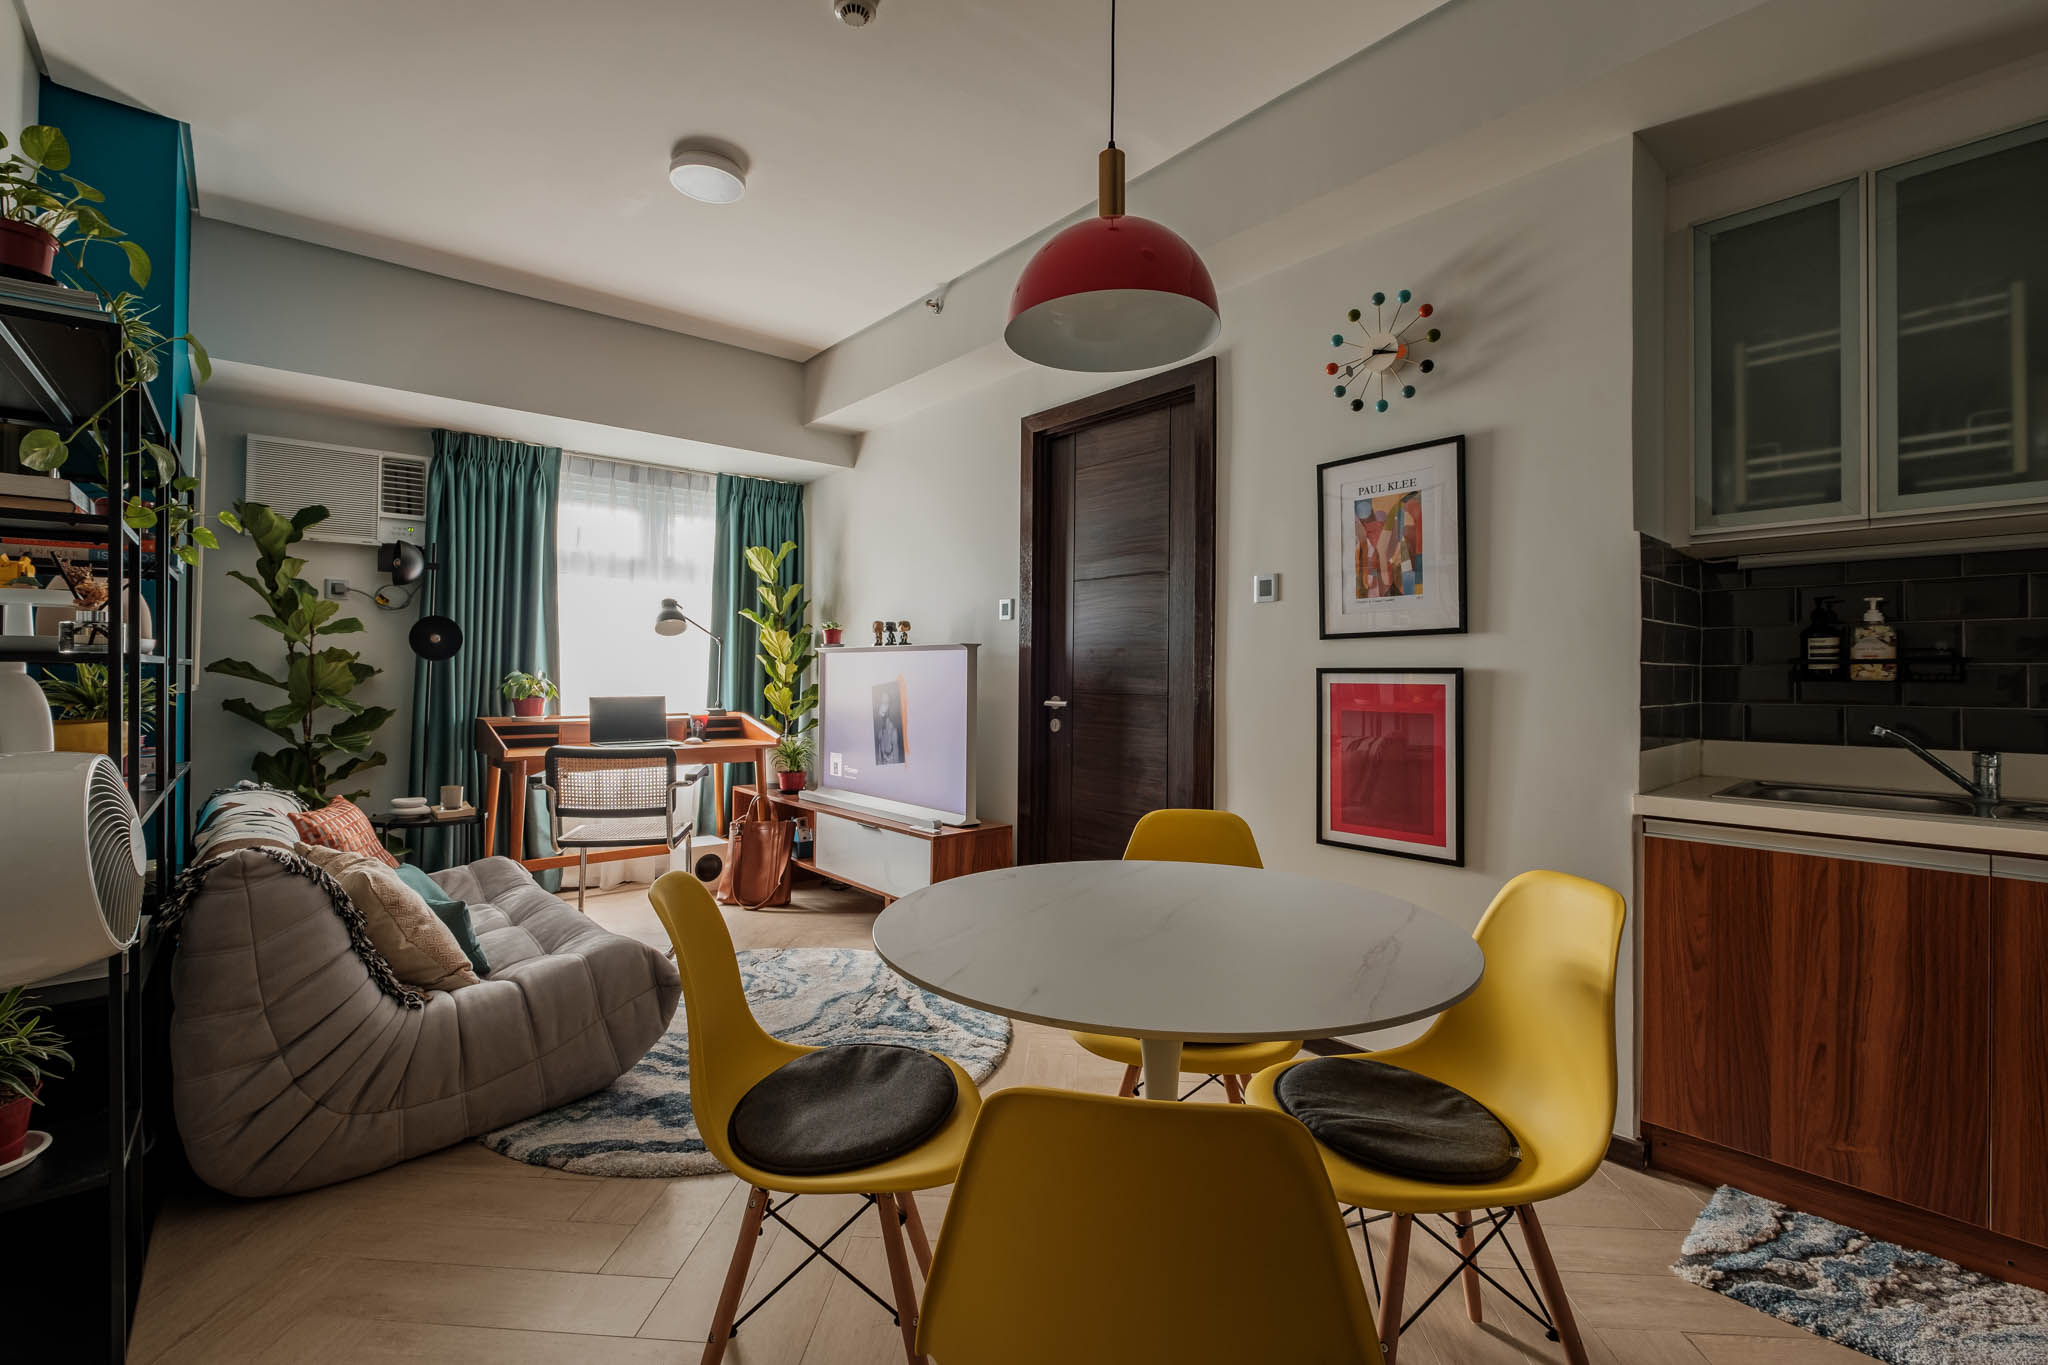 The dining area offers a welcoming first impression of the Eames-inspired yellow eggshell chair.